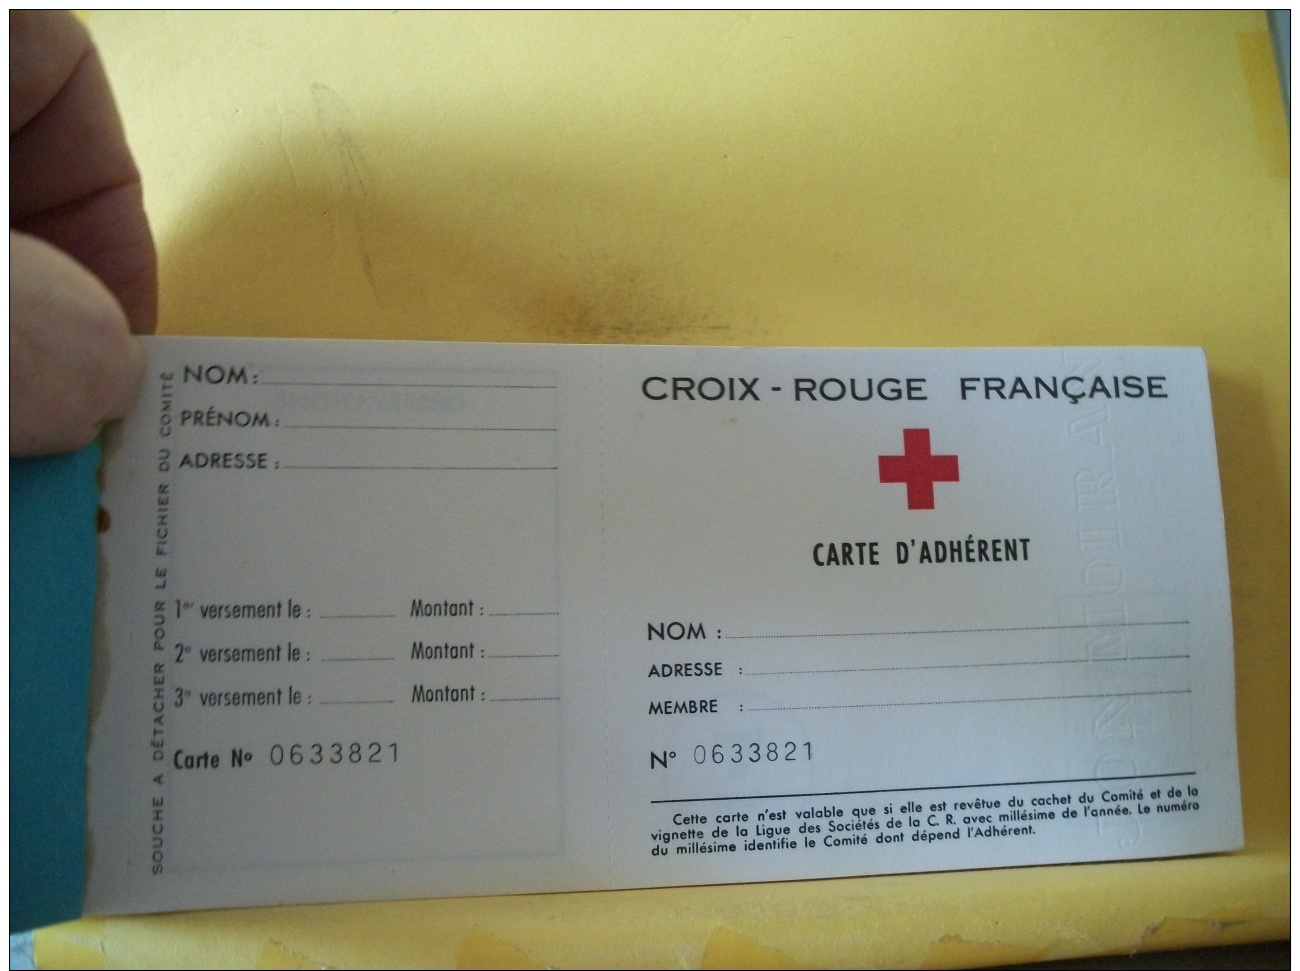 B19 3676 CPA - CROIX ROUGE FRANCAISE. CARNET D'ADHESION NUMEROTE COMPLET. ANNEE 1974 - Cruz Roja